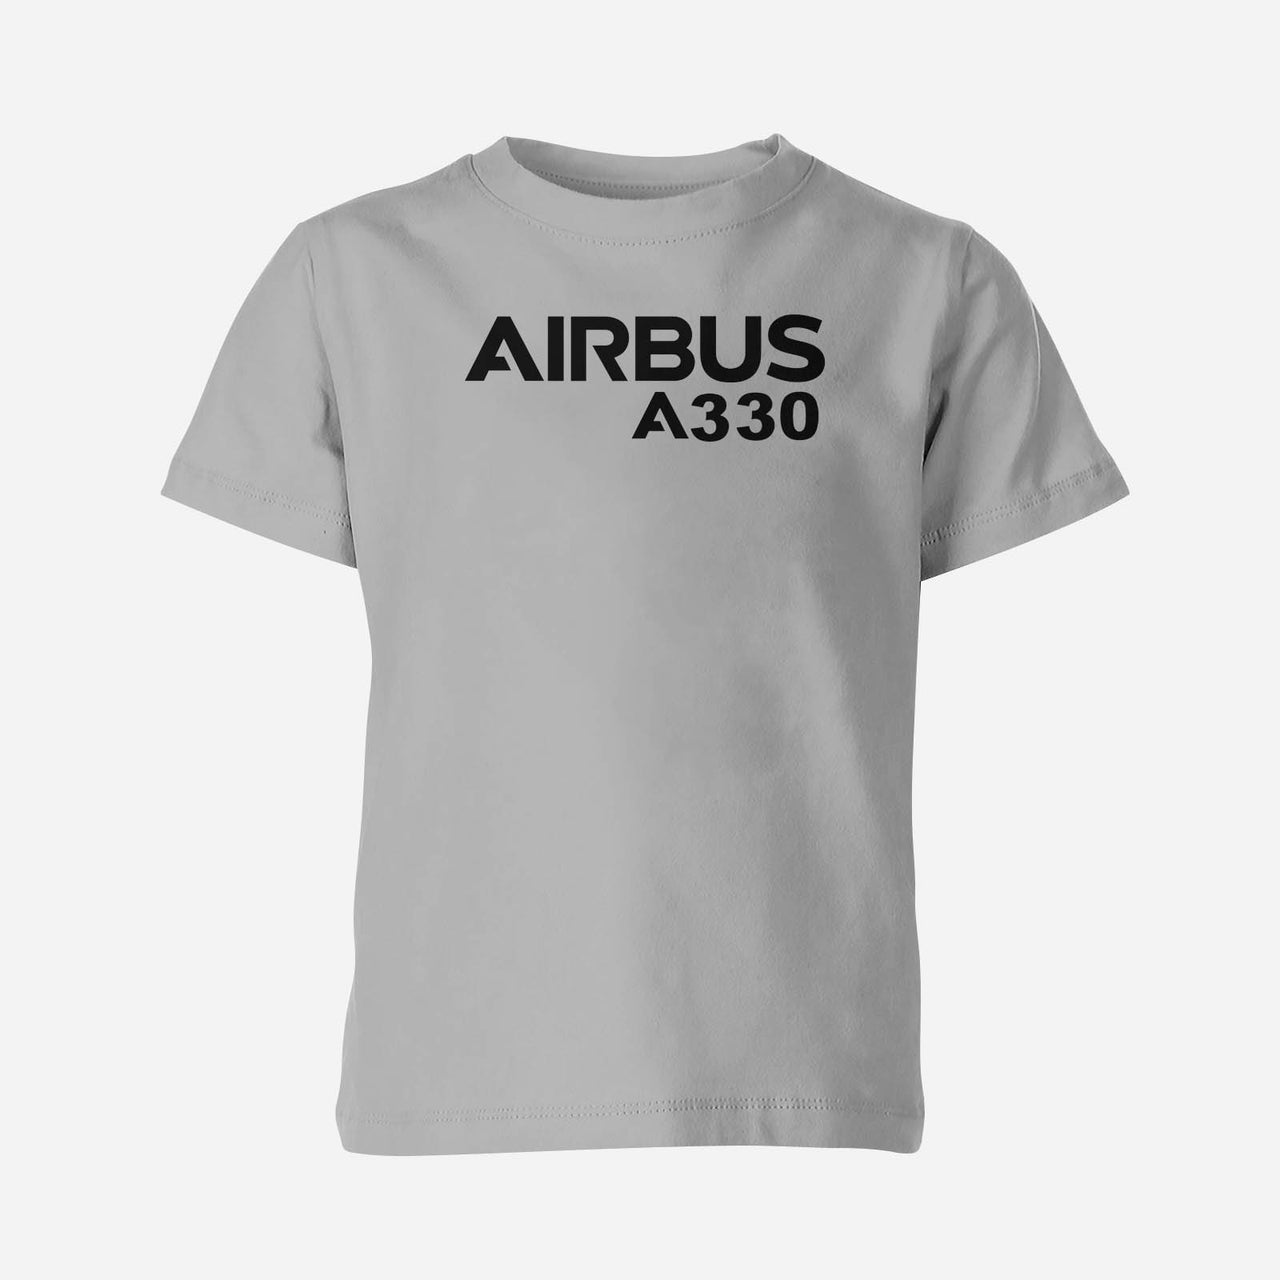 Airbus A330 & Text Designed Children T-Shirts